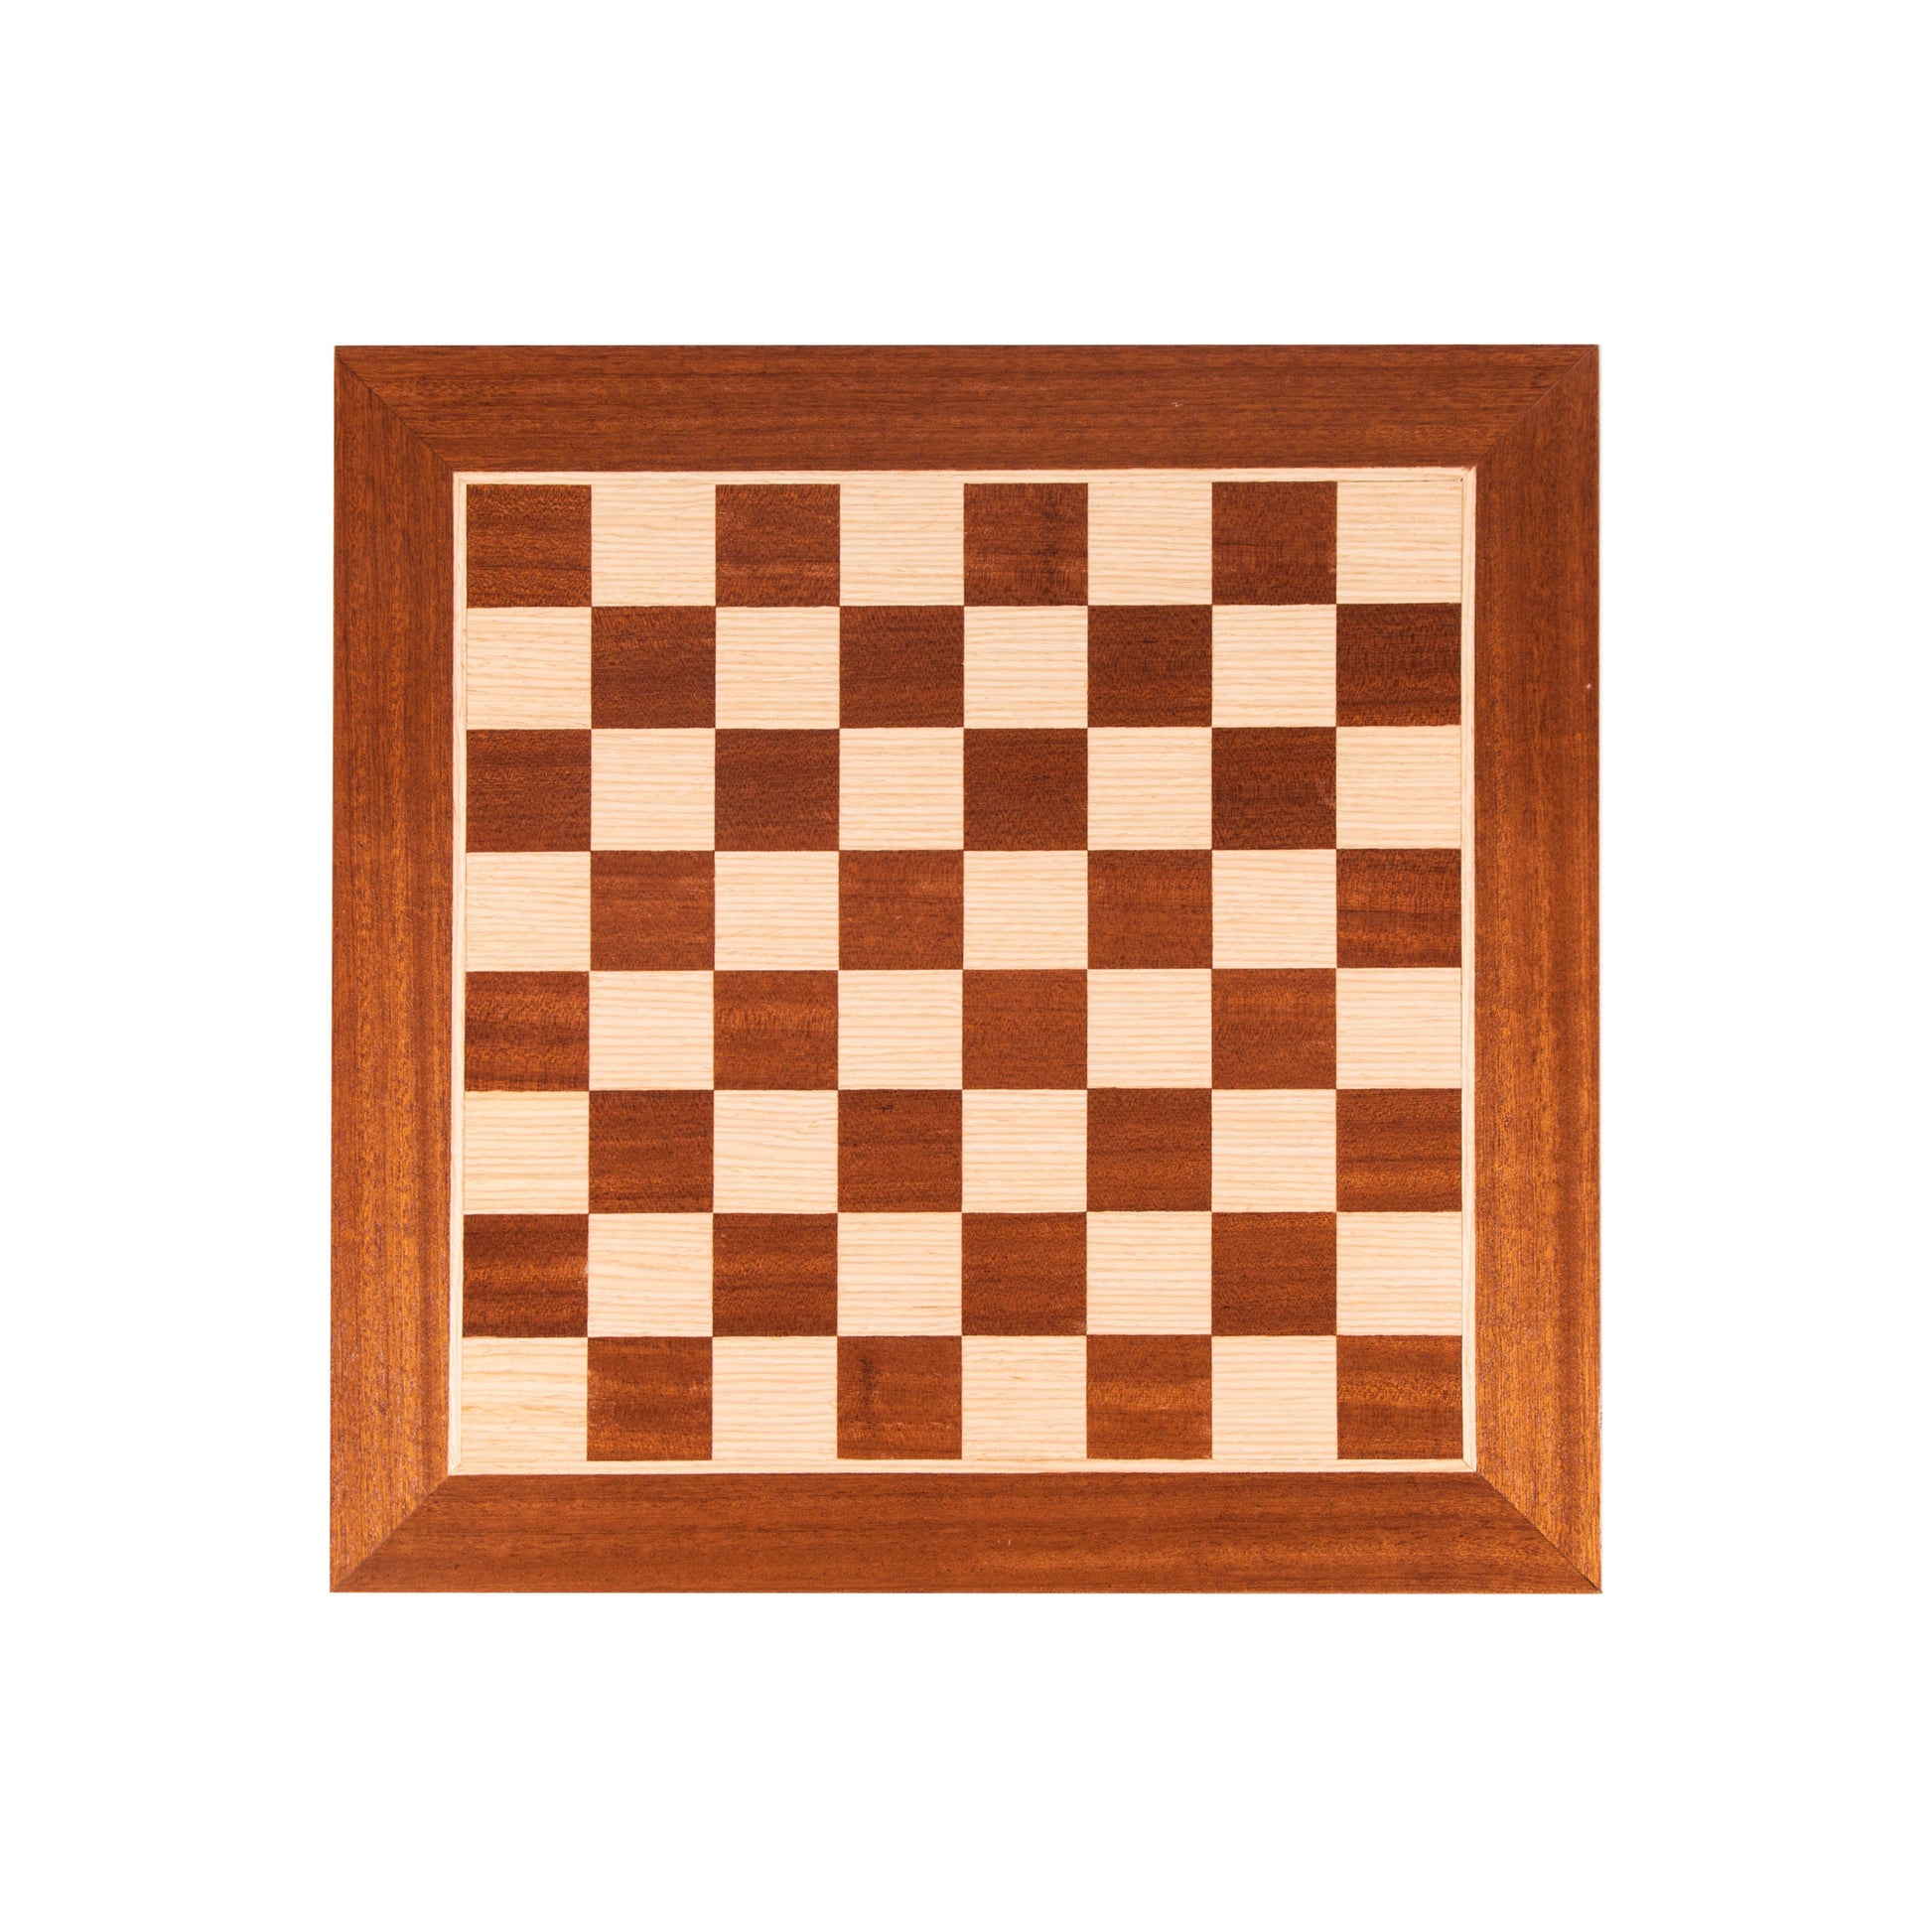 Handcrafted Mahogany Wood & Oak Inlaid Chessboard - 40x40cm (Medium) - Premium Chess from MANOPOULOS Chess & Backgammon - Just €55! Shop now at MANOPOULOS Chess & Backgammon